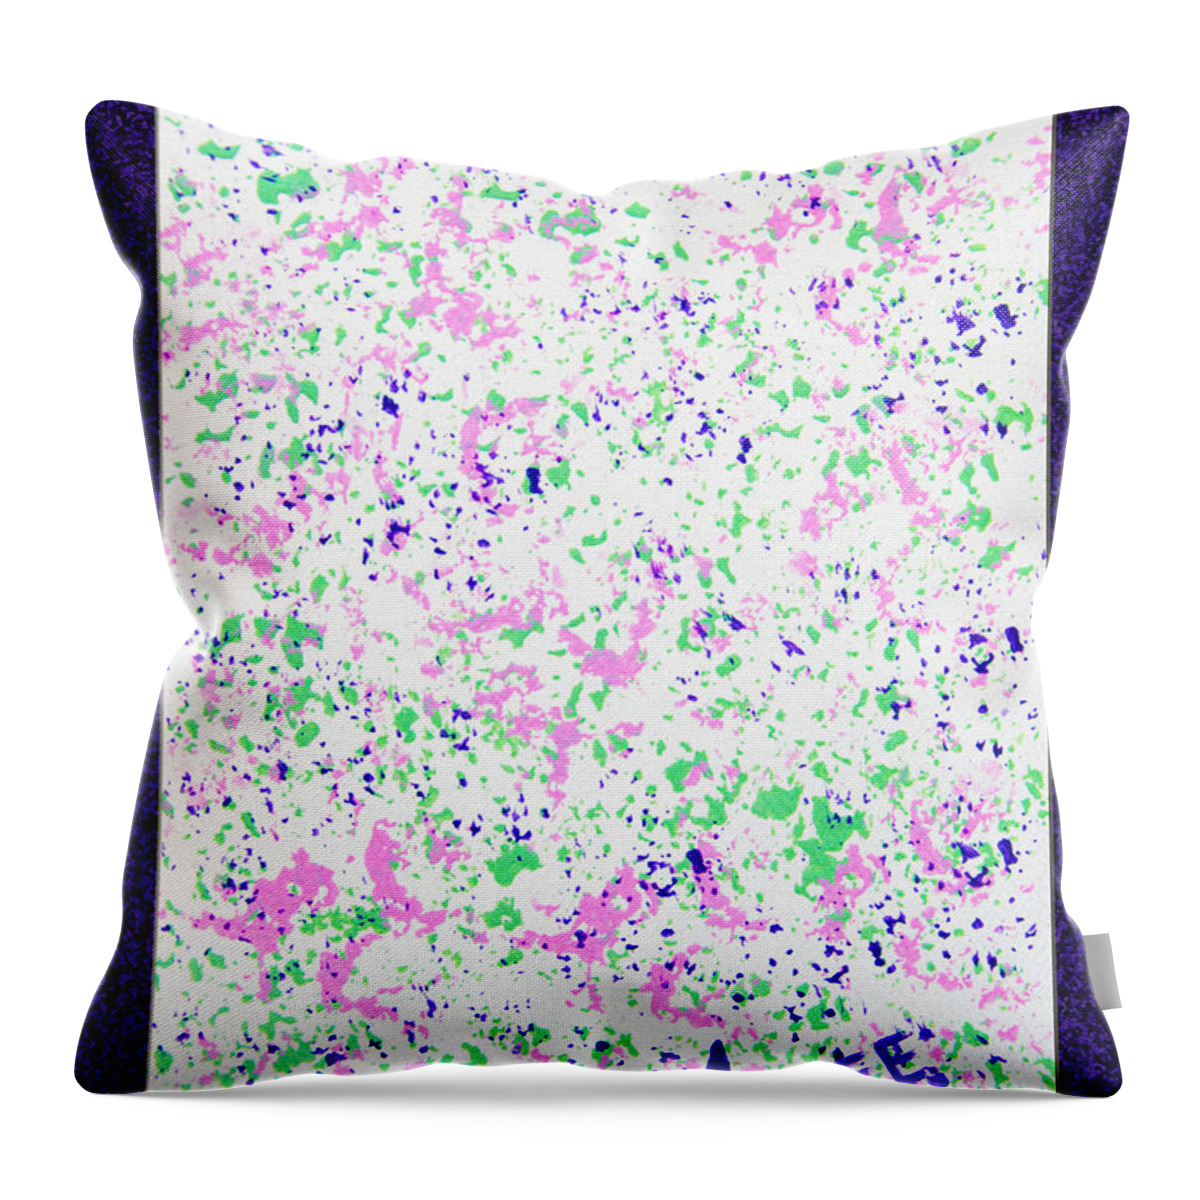 Painting Throw Pillow featuring the painting Speckle Painting 1 by Andee Design